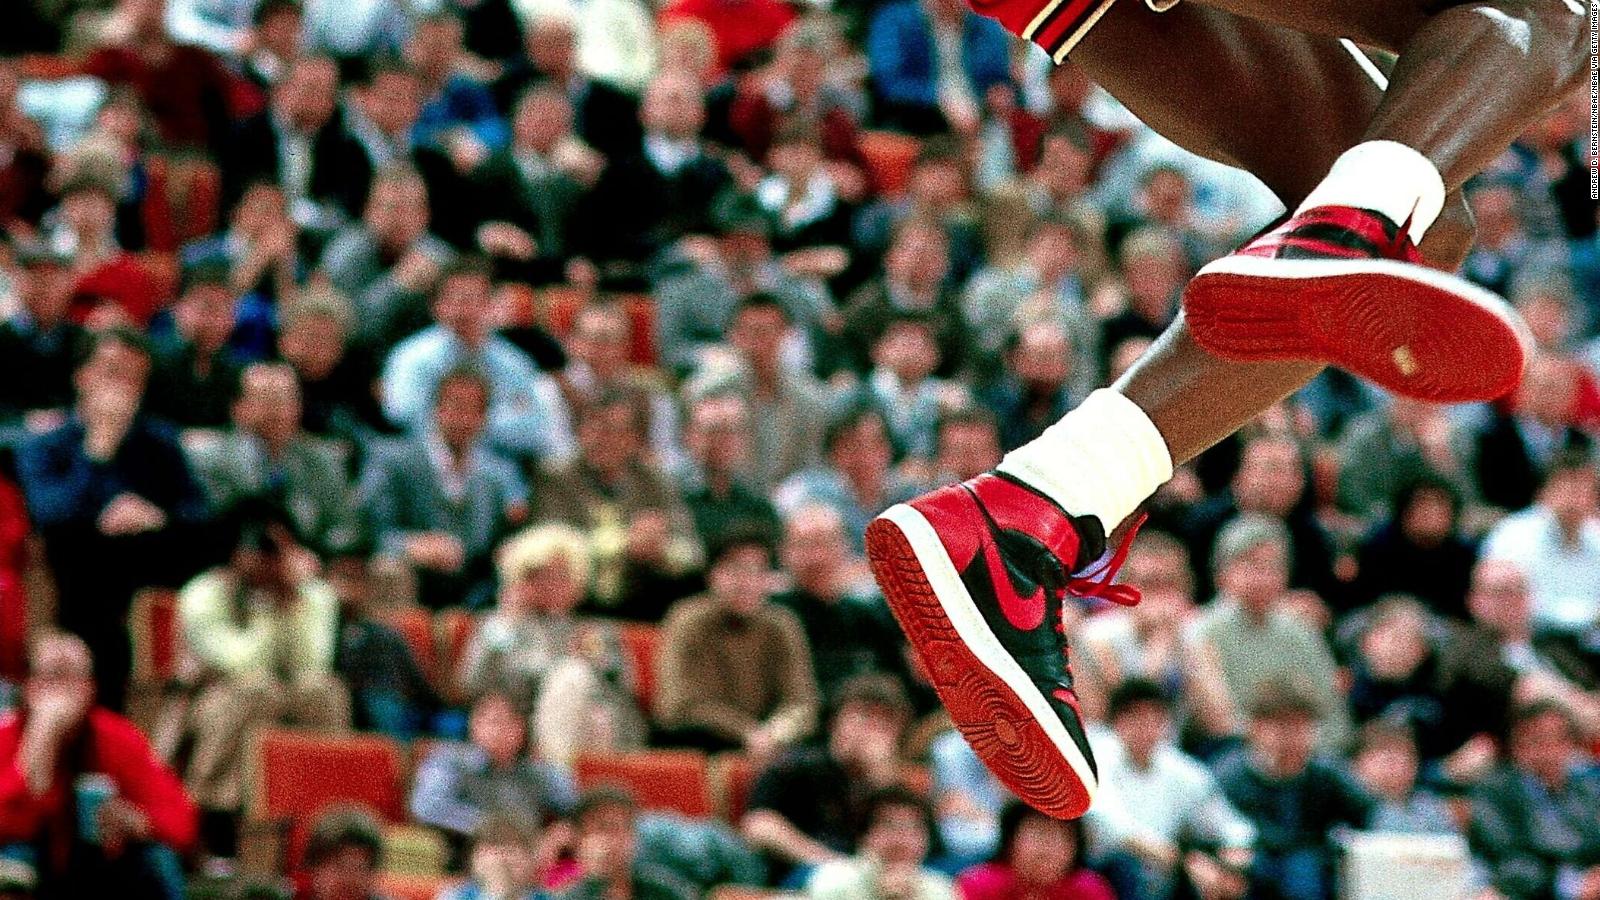 why was jordan 1 banned from the nba